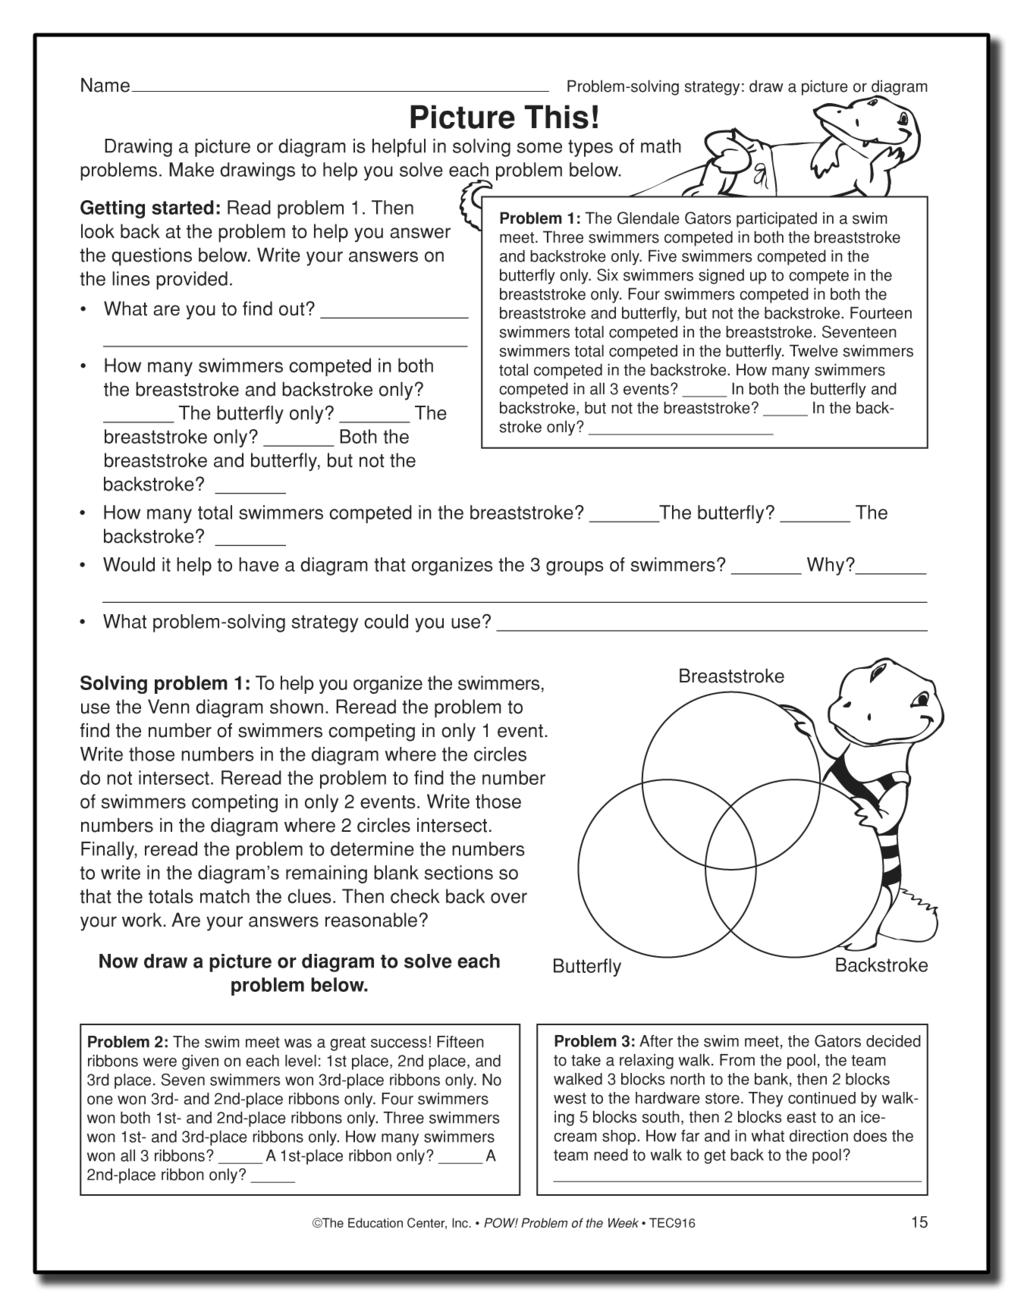 Lessons forteaching Problem-Solving Strategies Lesson 2: Draw a Picture or Diagram Description of strategy: Problem solvers use this strategy when a simple picture or diagram helps them visualize a